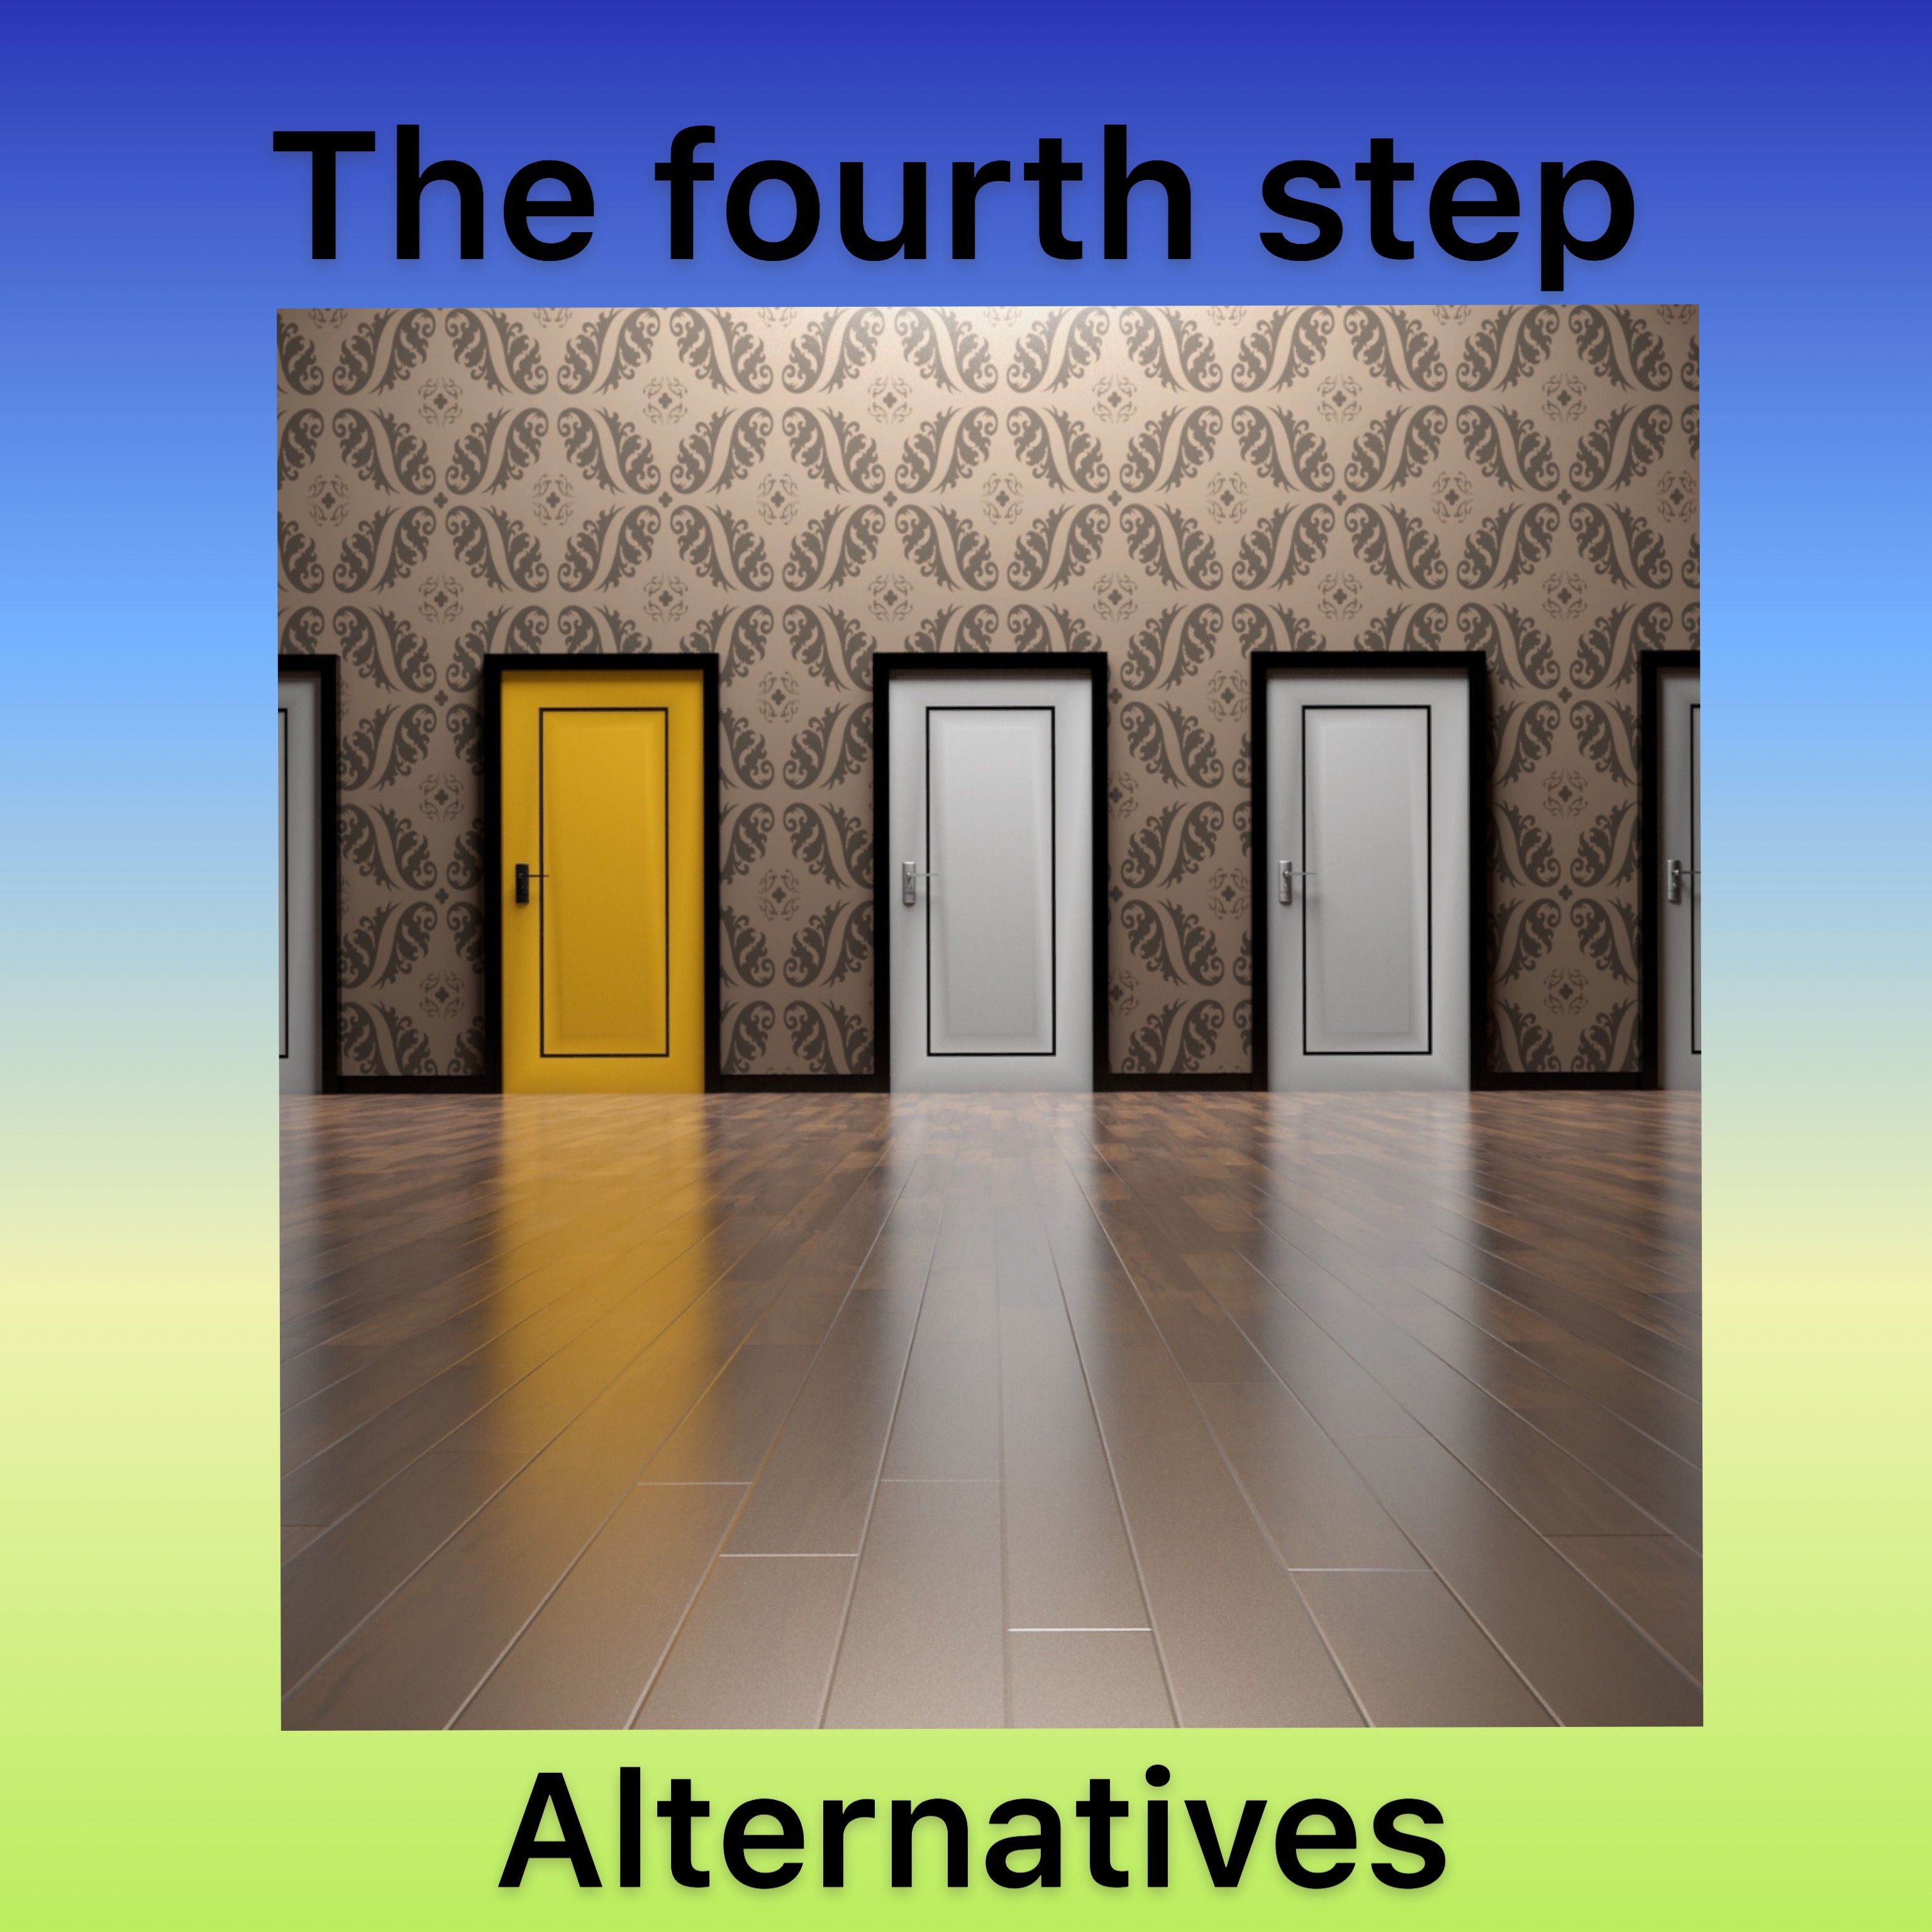 The fourth step